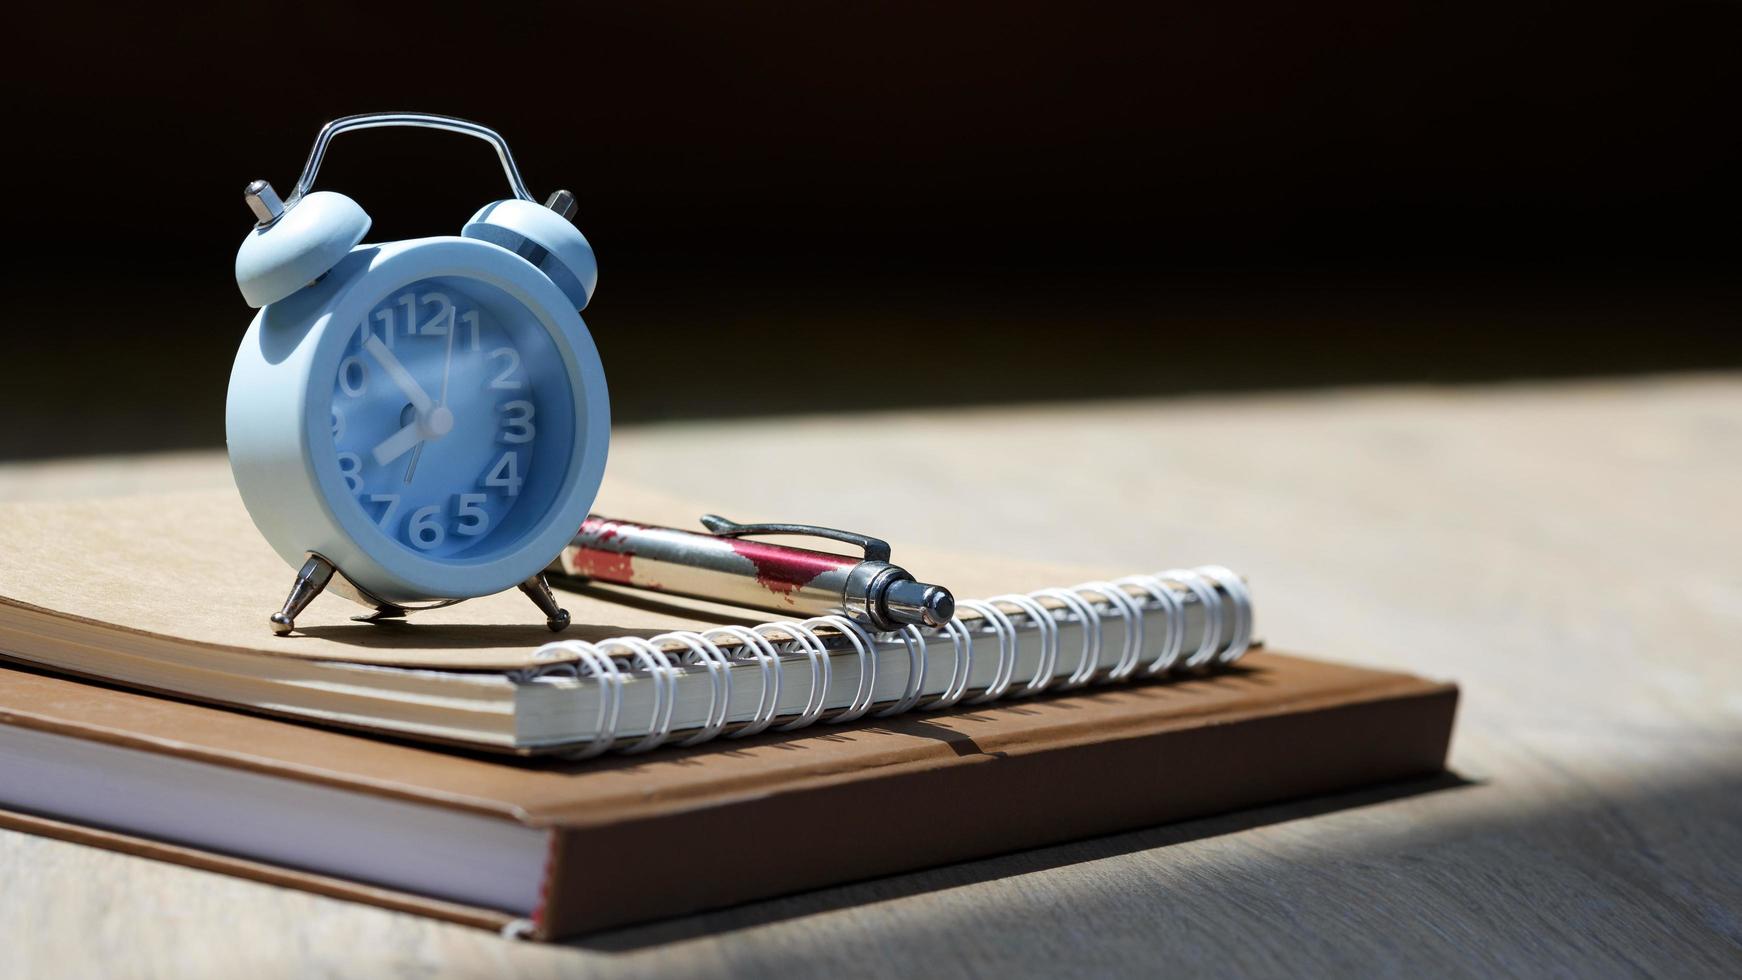 Selective focus at little blue alarm clock with ballpoint pen and kraft paper books with sunlight and shadow on wooden table surface, hobby and relaxing time concept photo